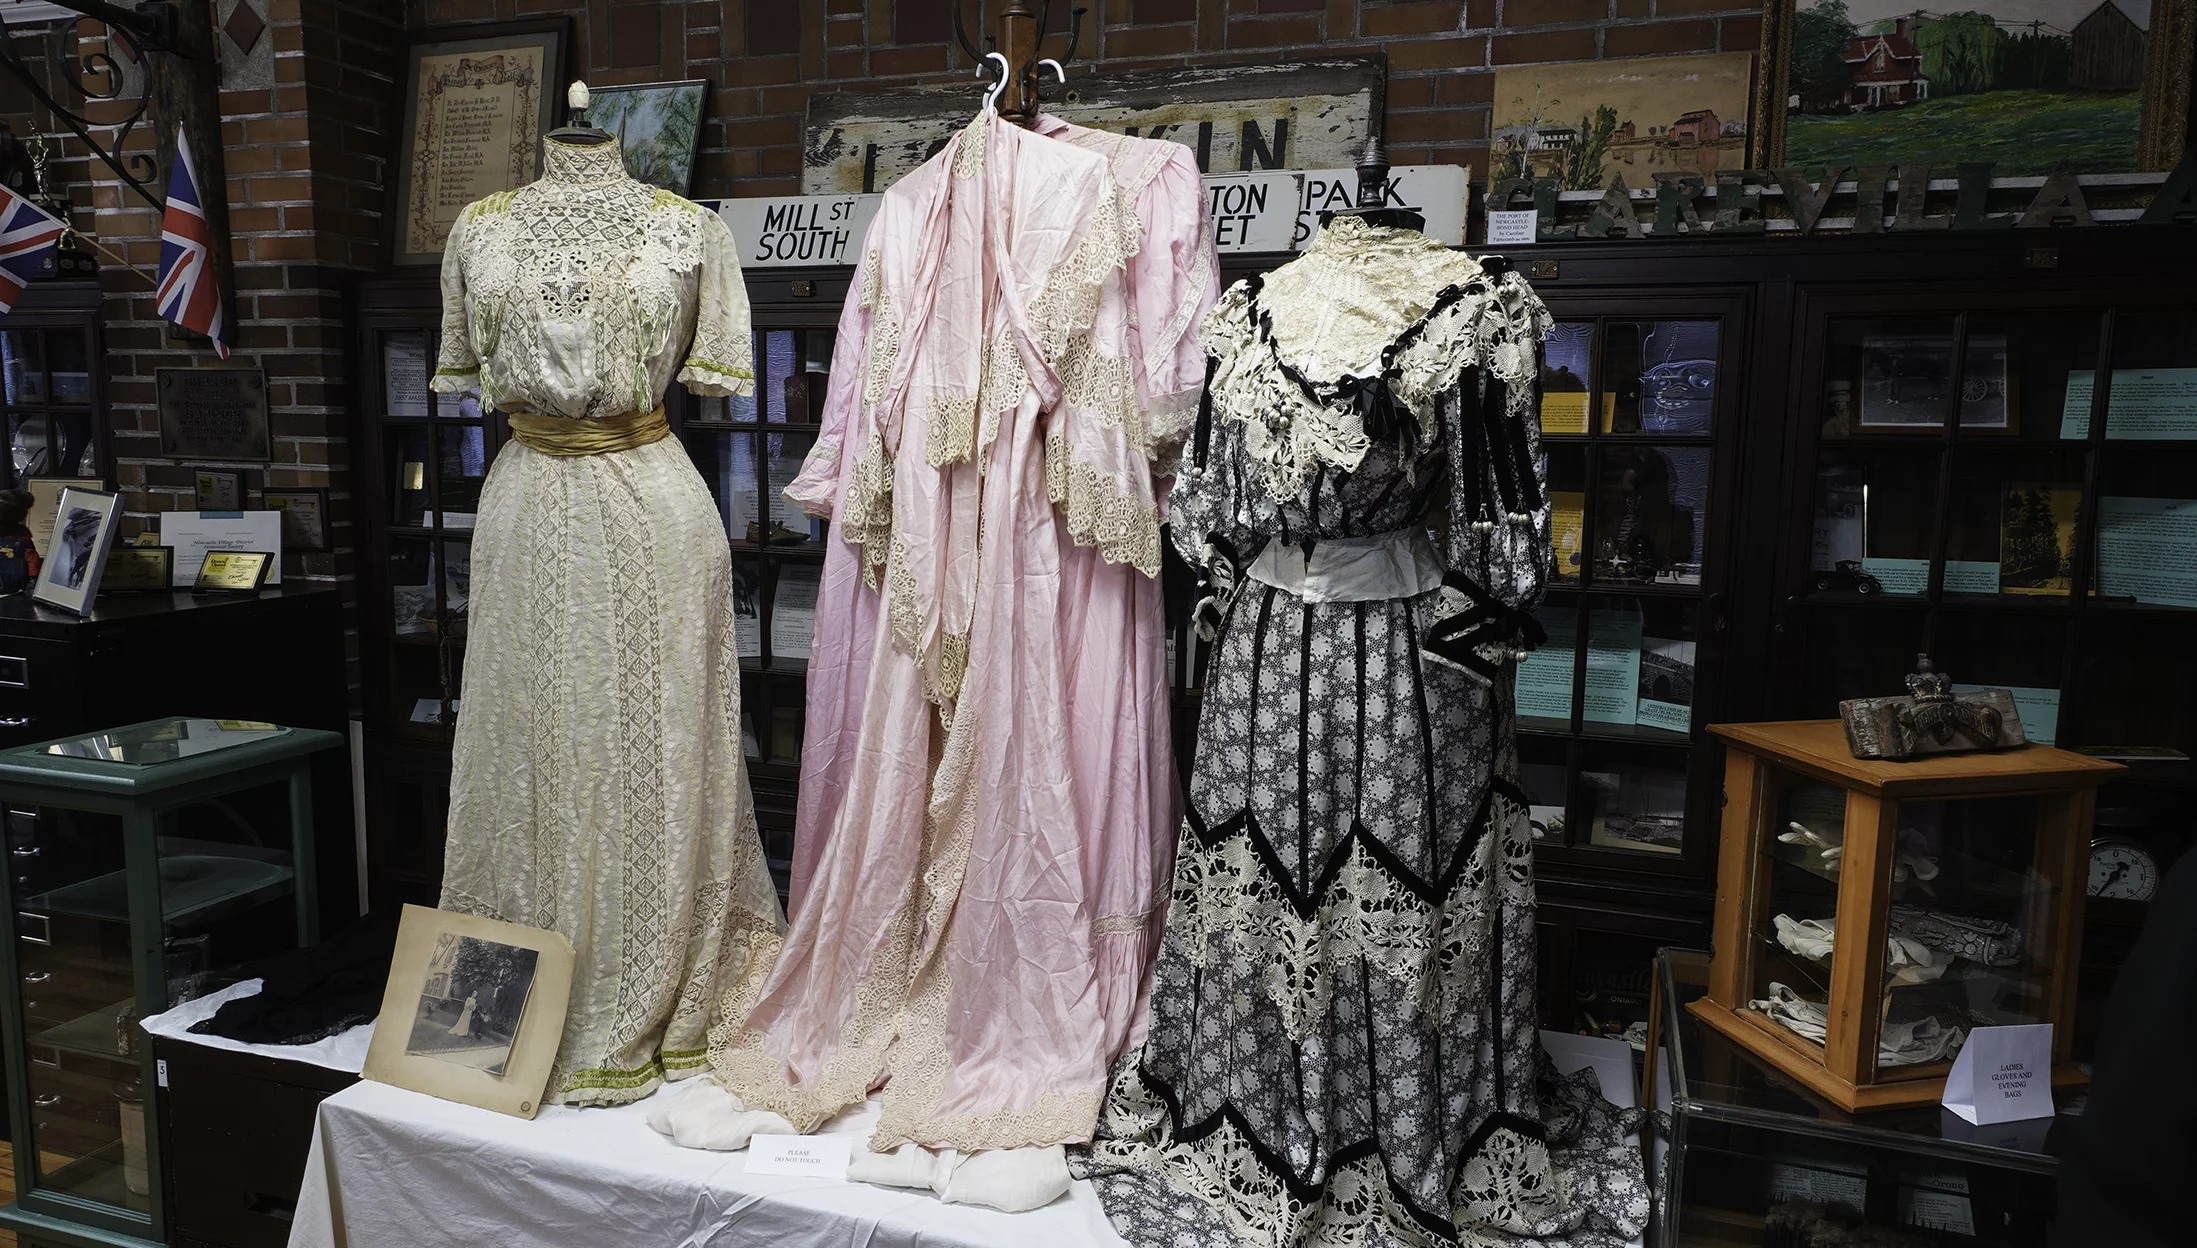 Dresses on display in the Room, winter 2020